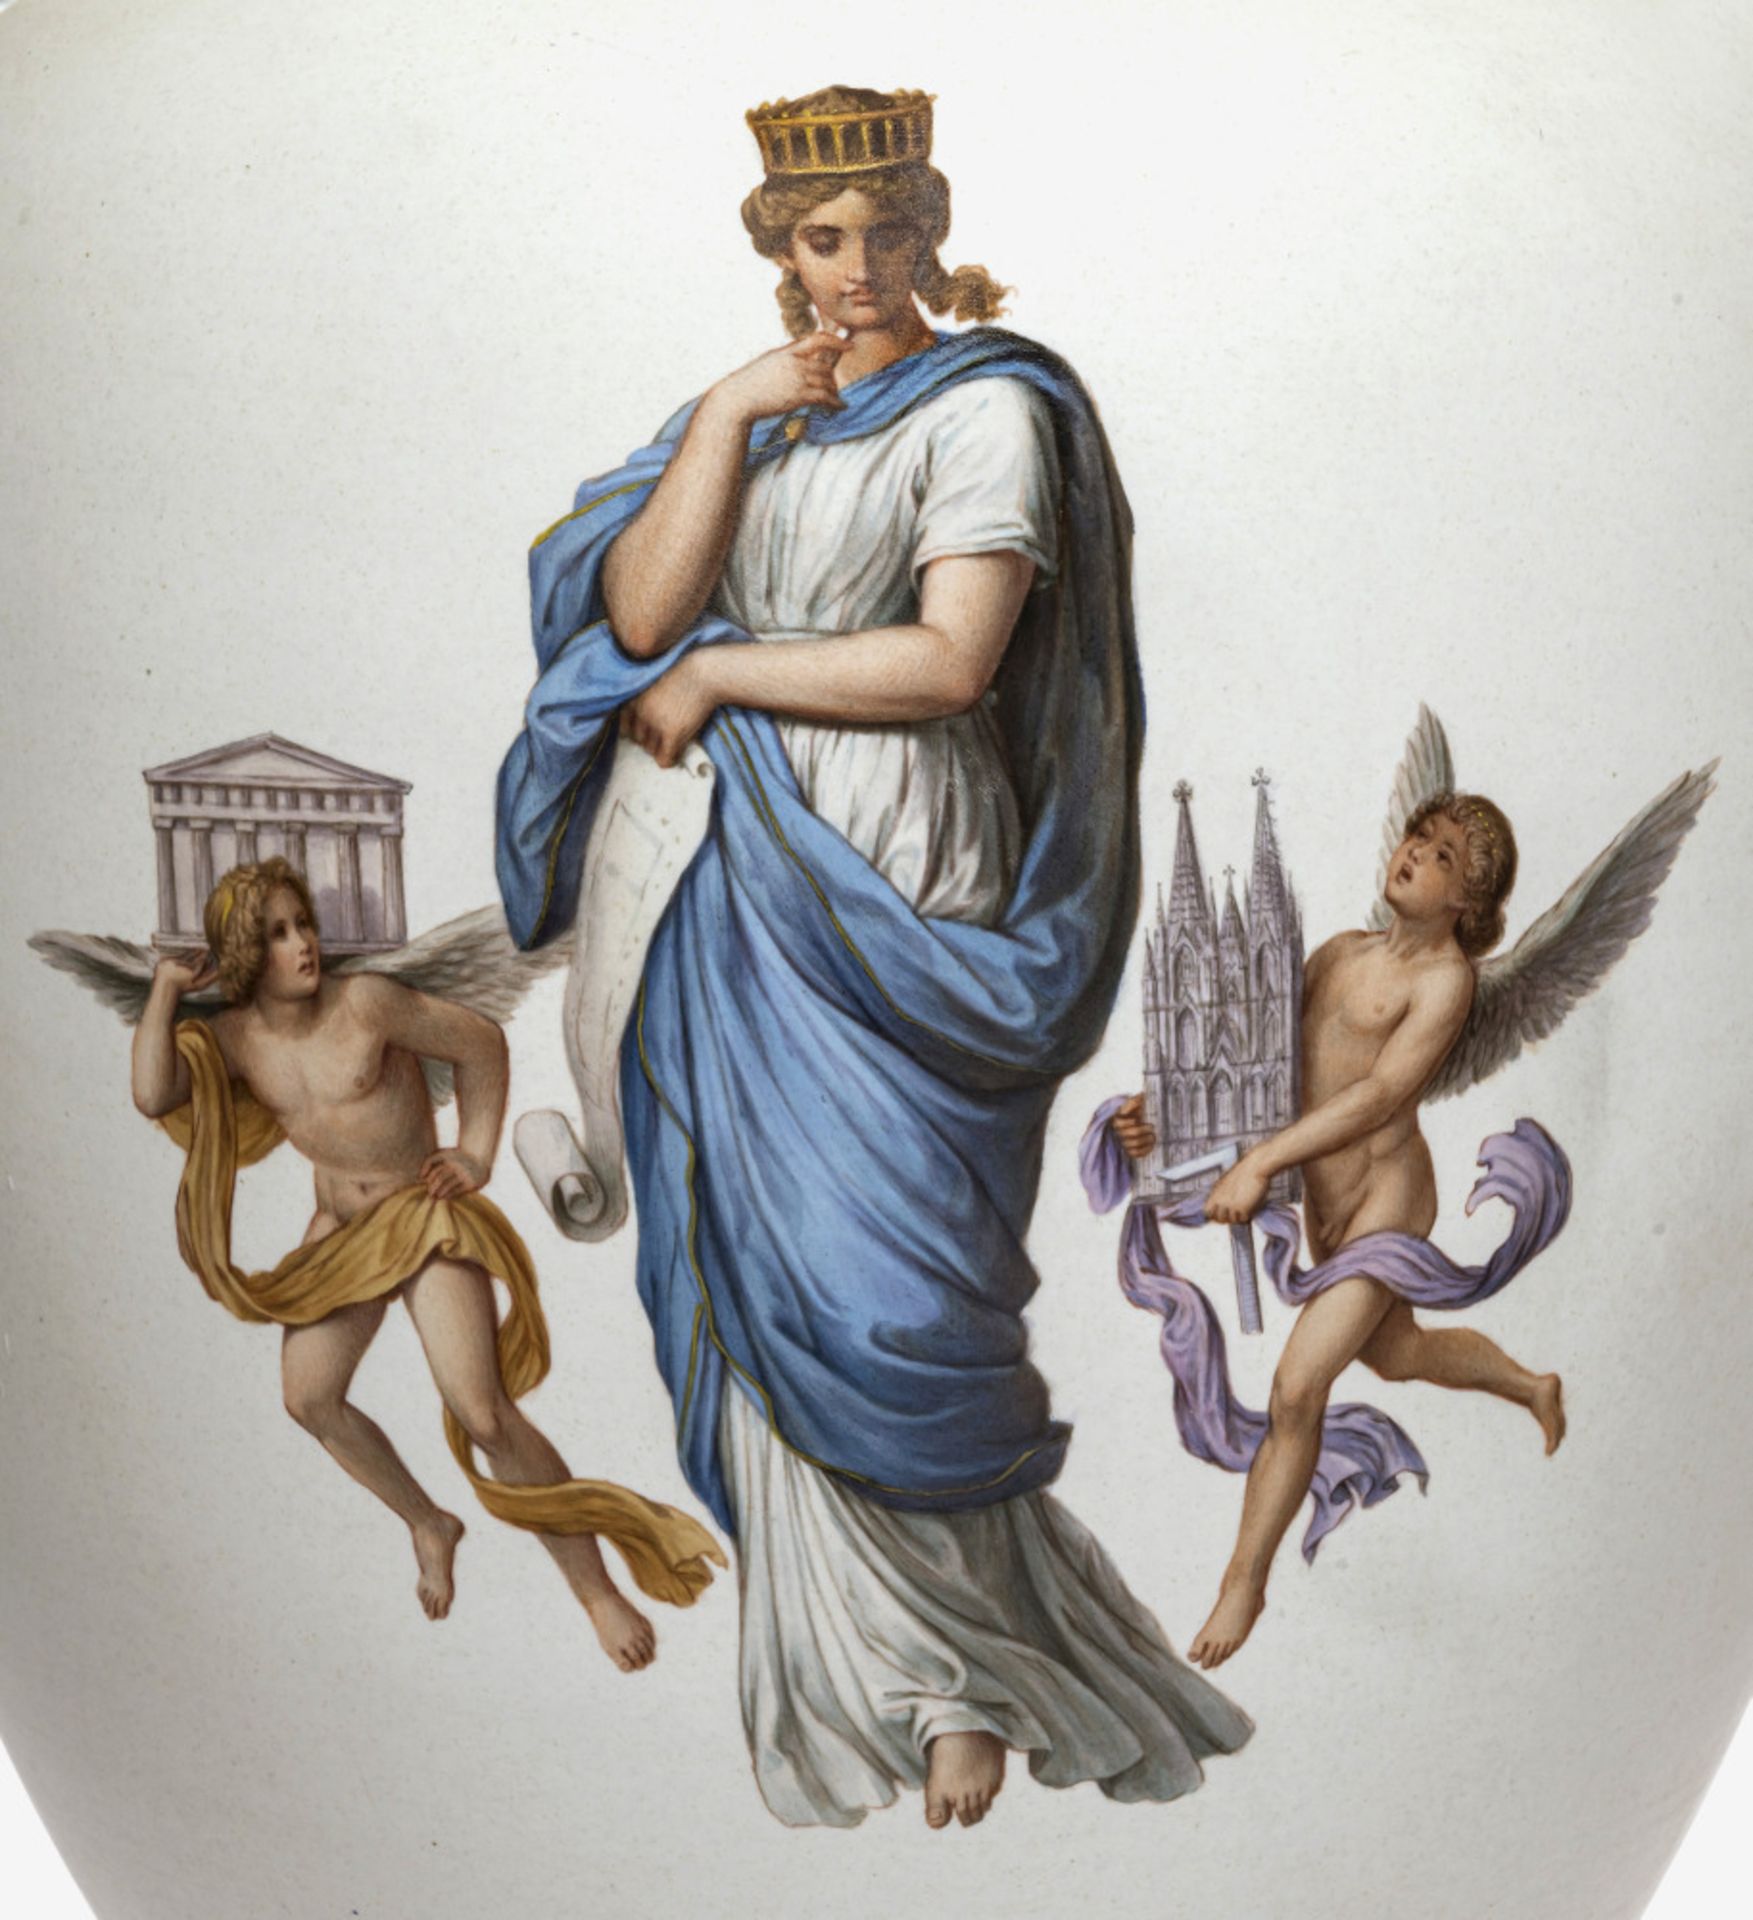 A magnificent vase with the allegory of architecture - KPM Berlin, circa 1860, model by Julius W. Ma - Image 2 of 4